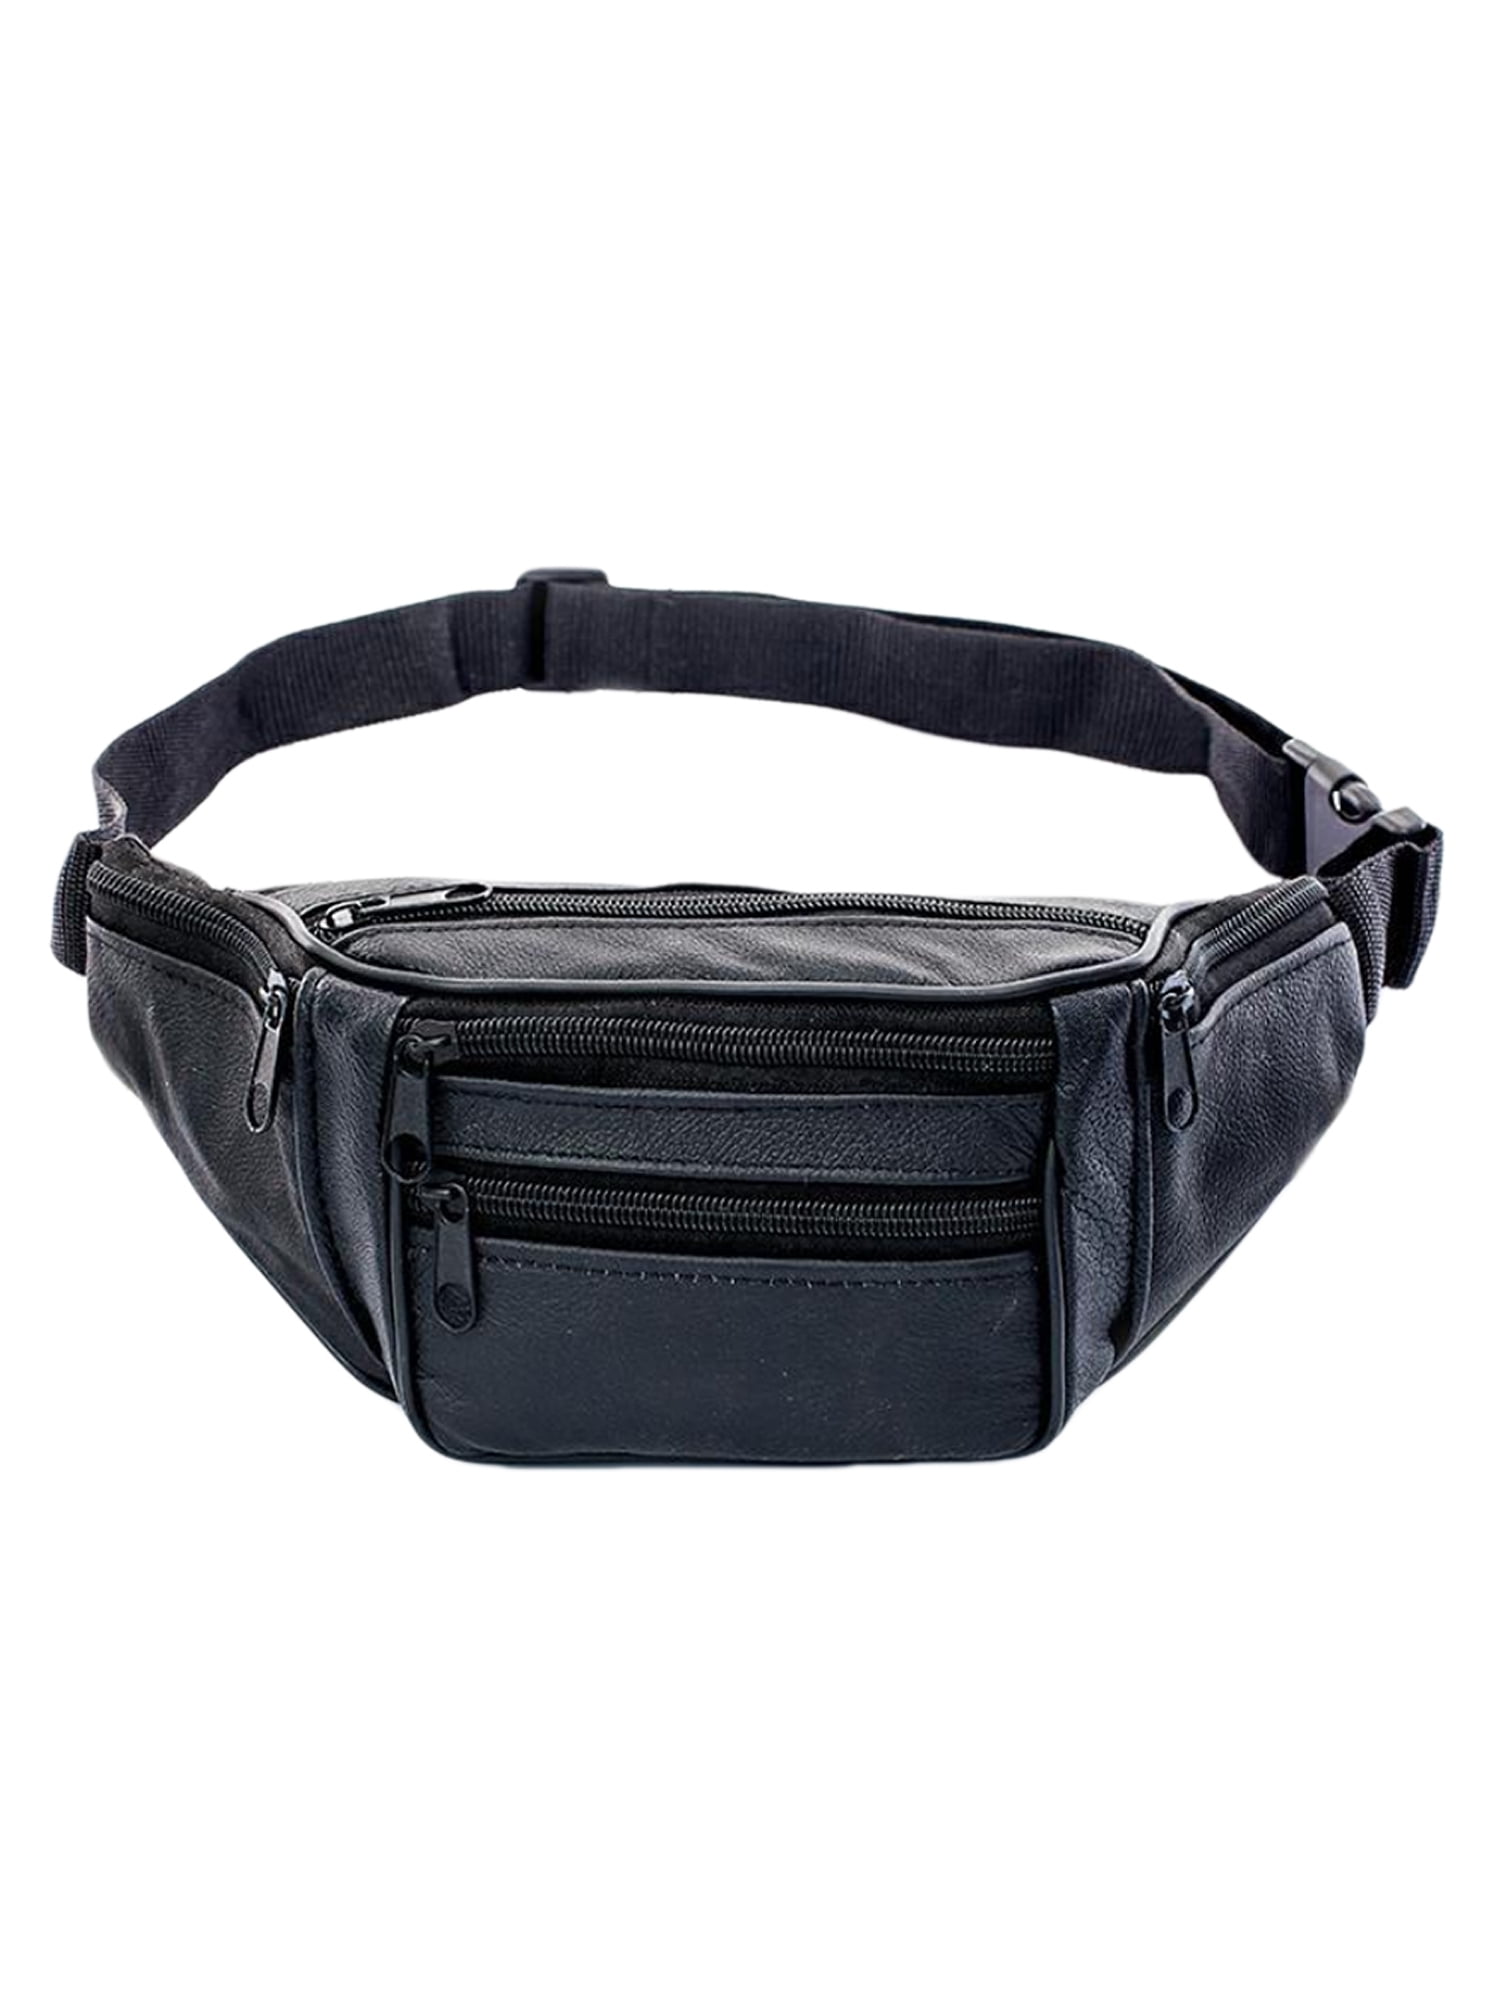 Leather Fanny Pack, TSV Waterproof Cell Phone Waist Bag with 7 Zipper  Pockets for Men Women, Adjustable Bum Packs, Black 